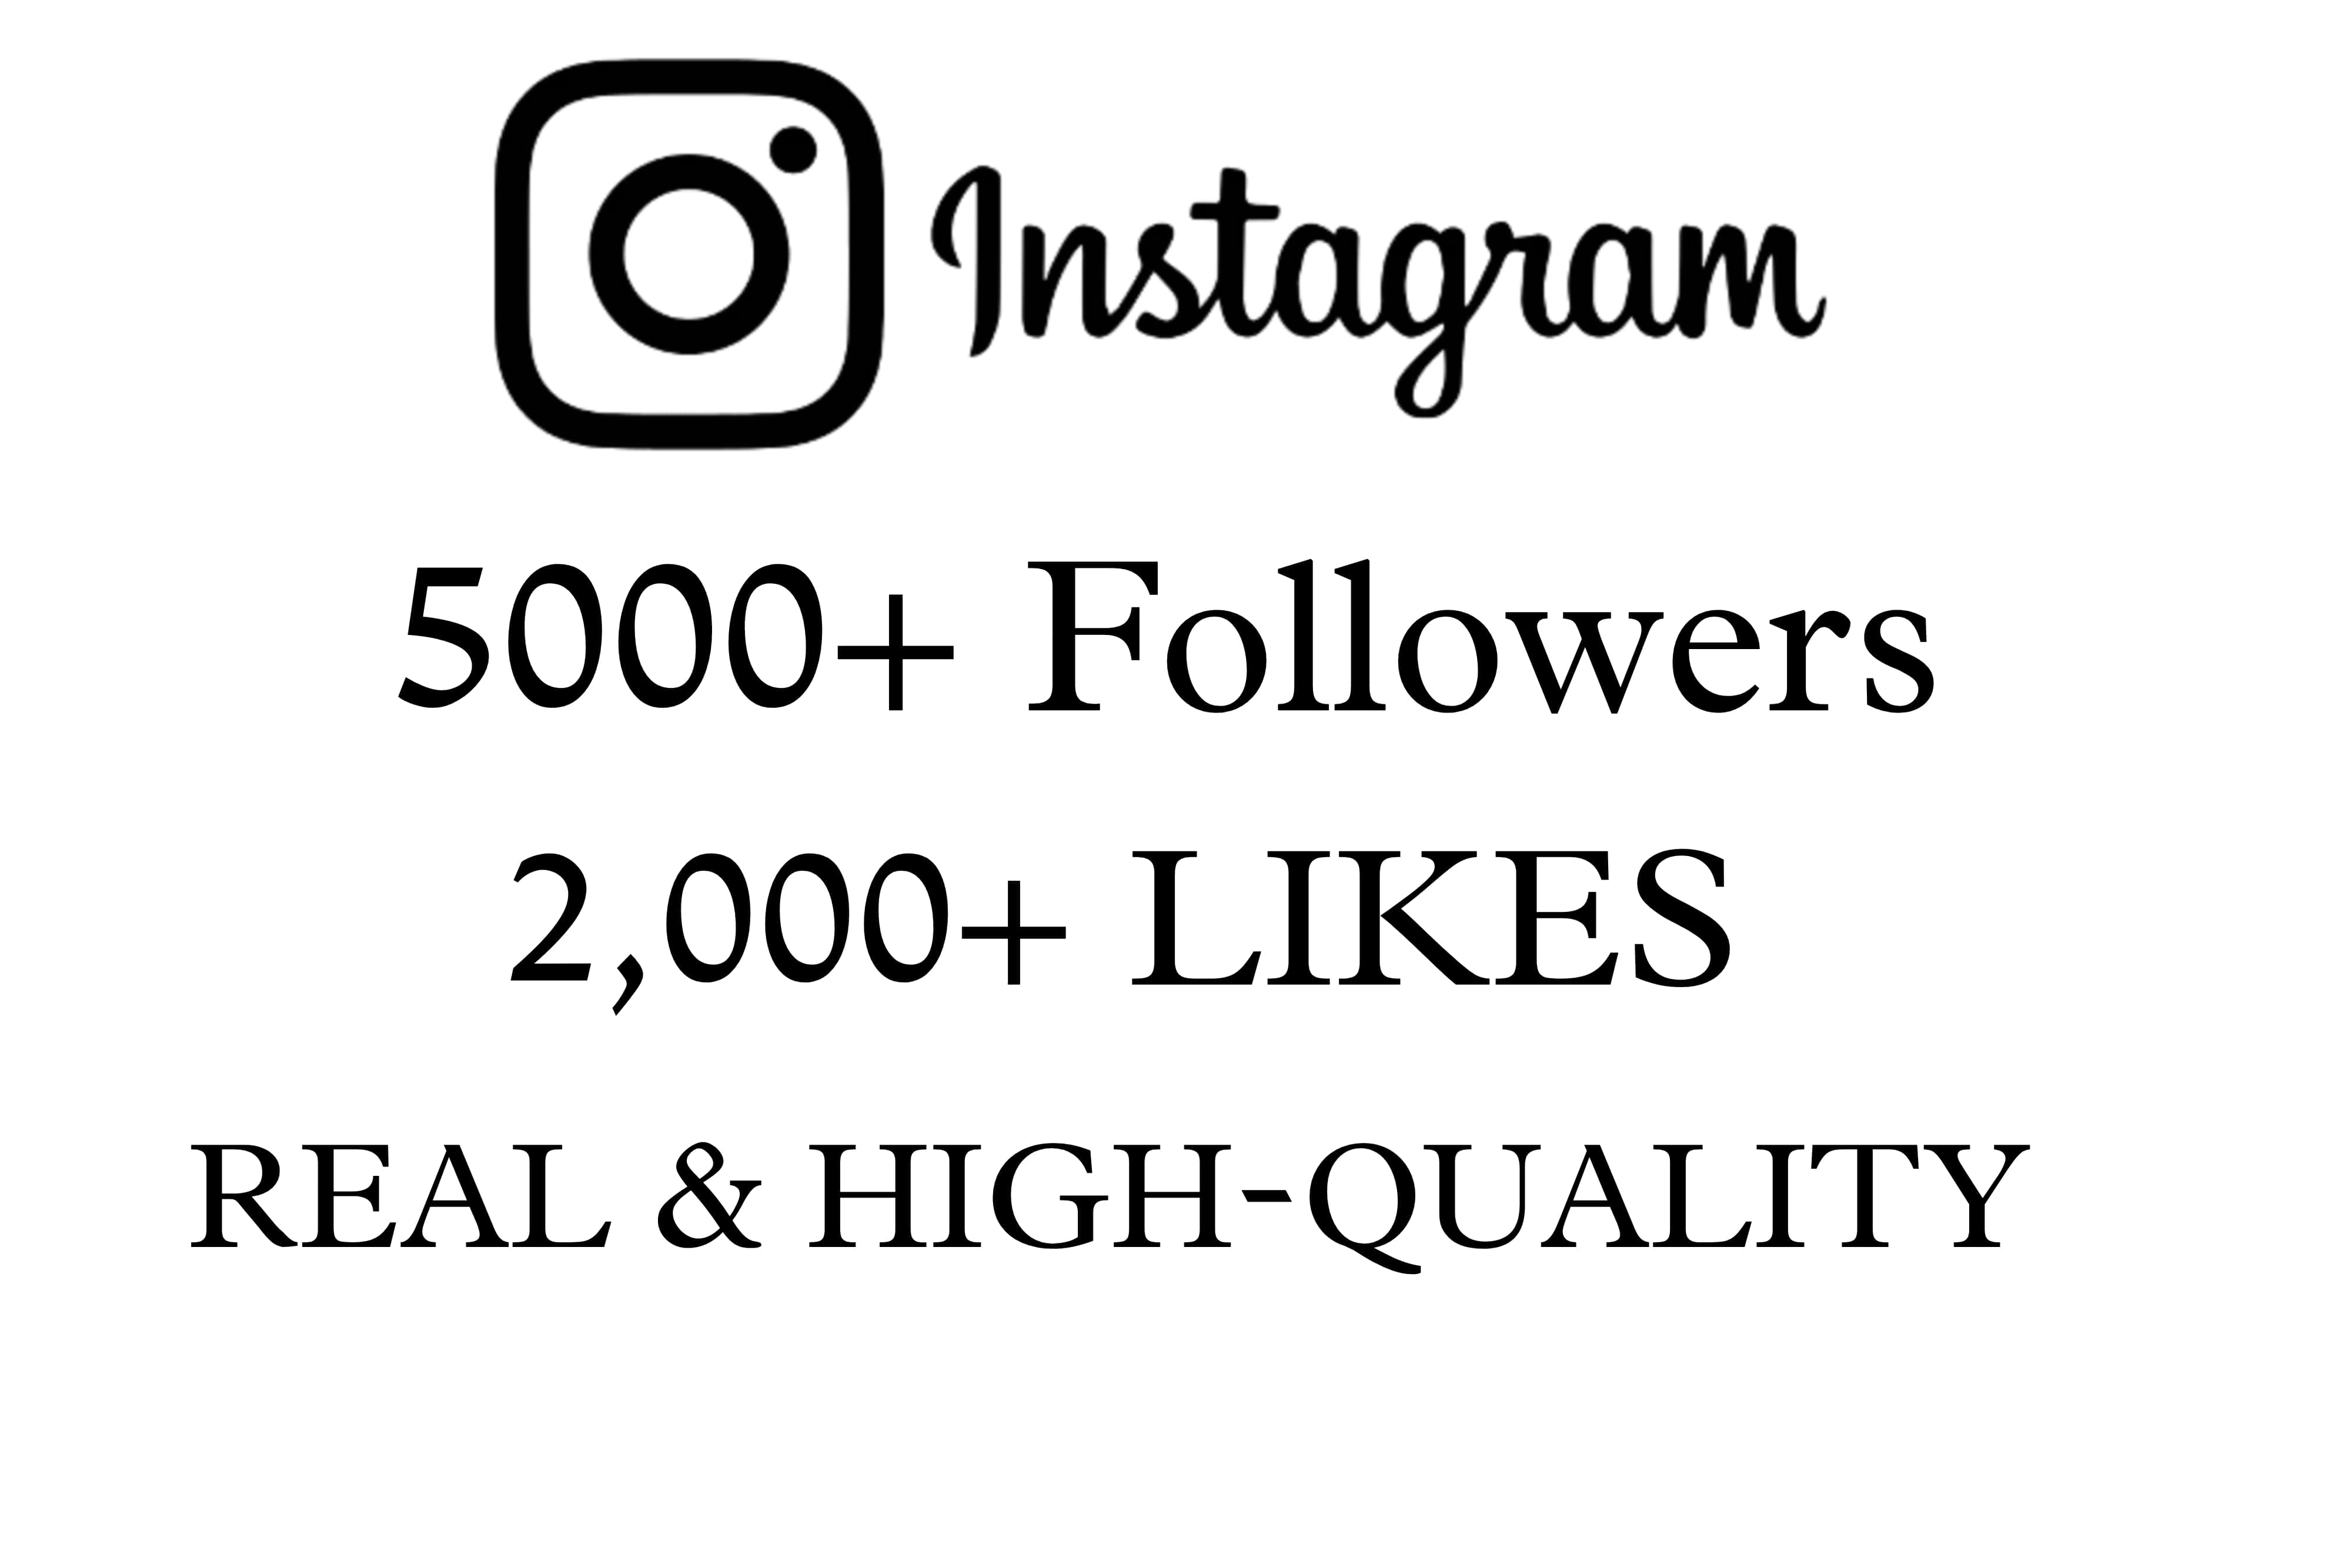 Instagram 5,000+ Followers and 2,000+ Likes, Real And High Quality.